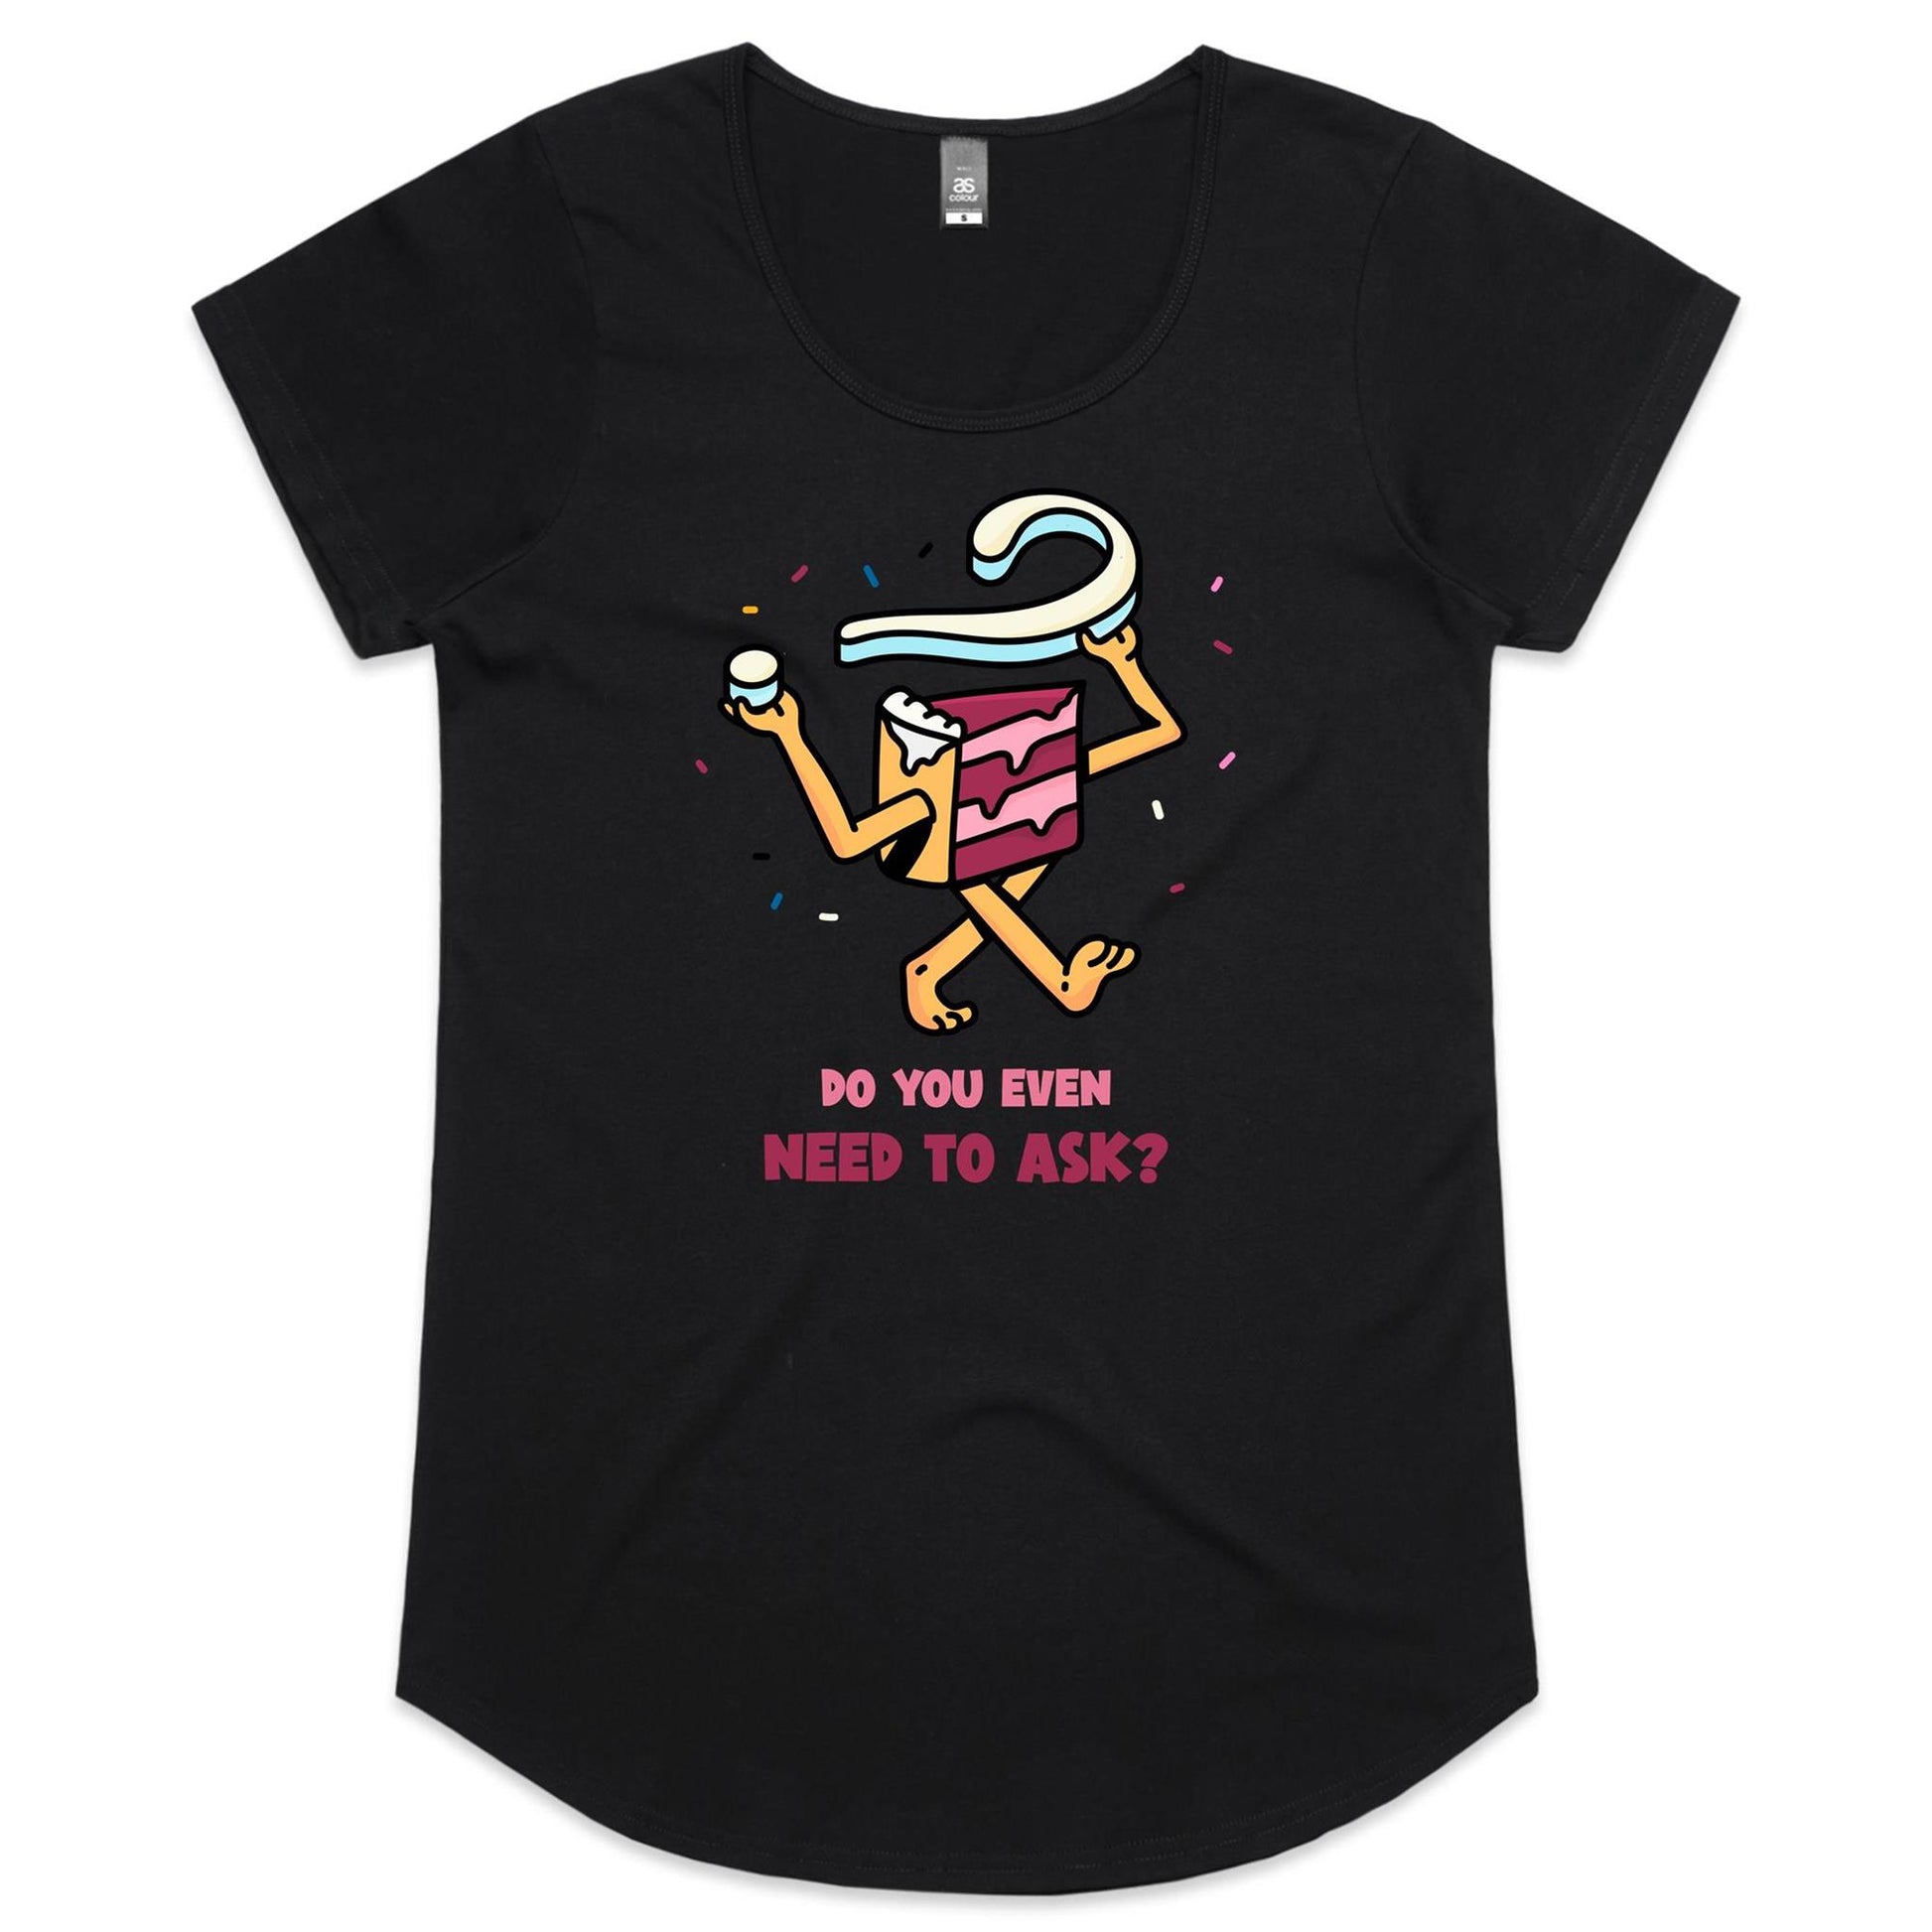 Cake, Do You Even Need To Ask - Womens Scoop Neck T-Shirt Black Womens Scoop Neck T-shirt